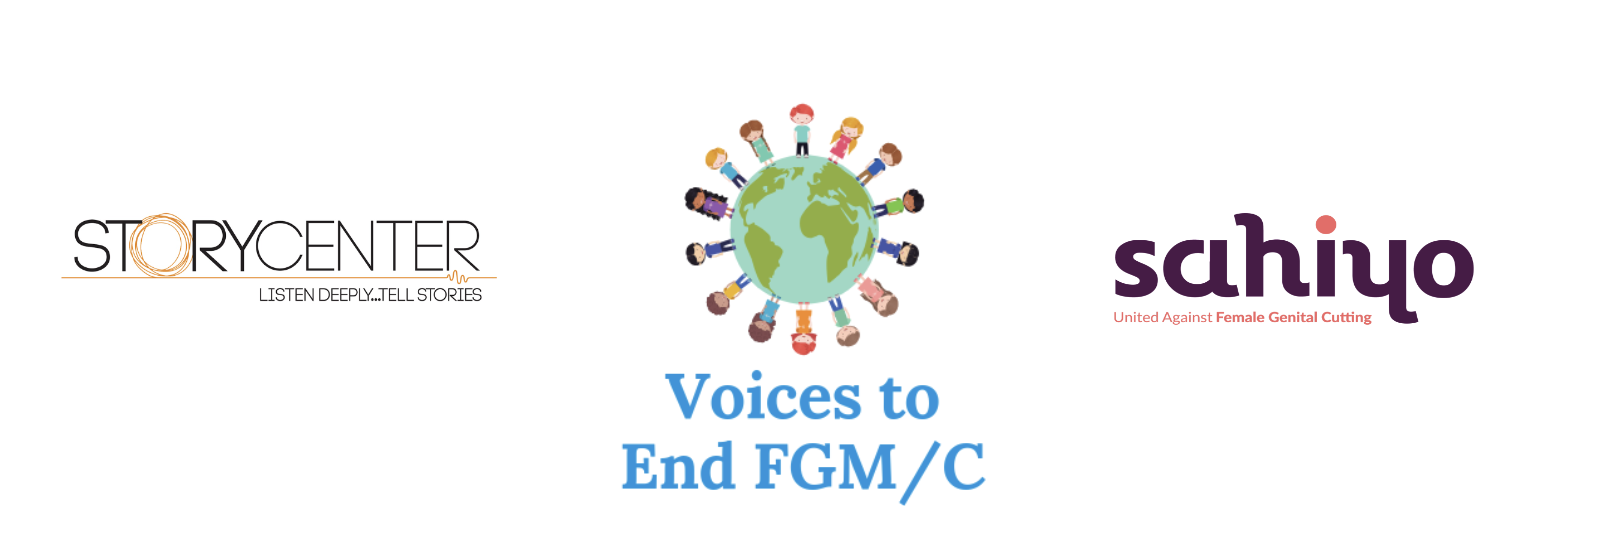 PRESS RELEASE: Dozens of Survivors of Female Genital Cutting Share Stories on  New ‘Voices To End FGM/C’ Website